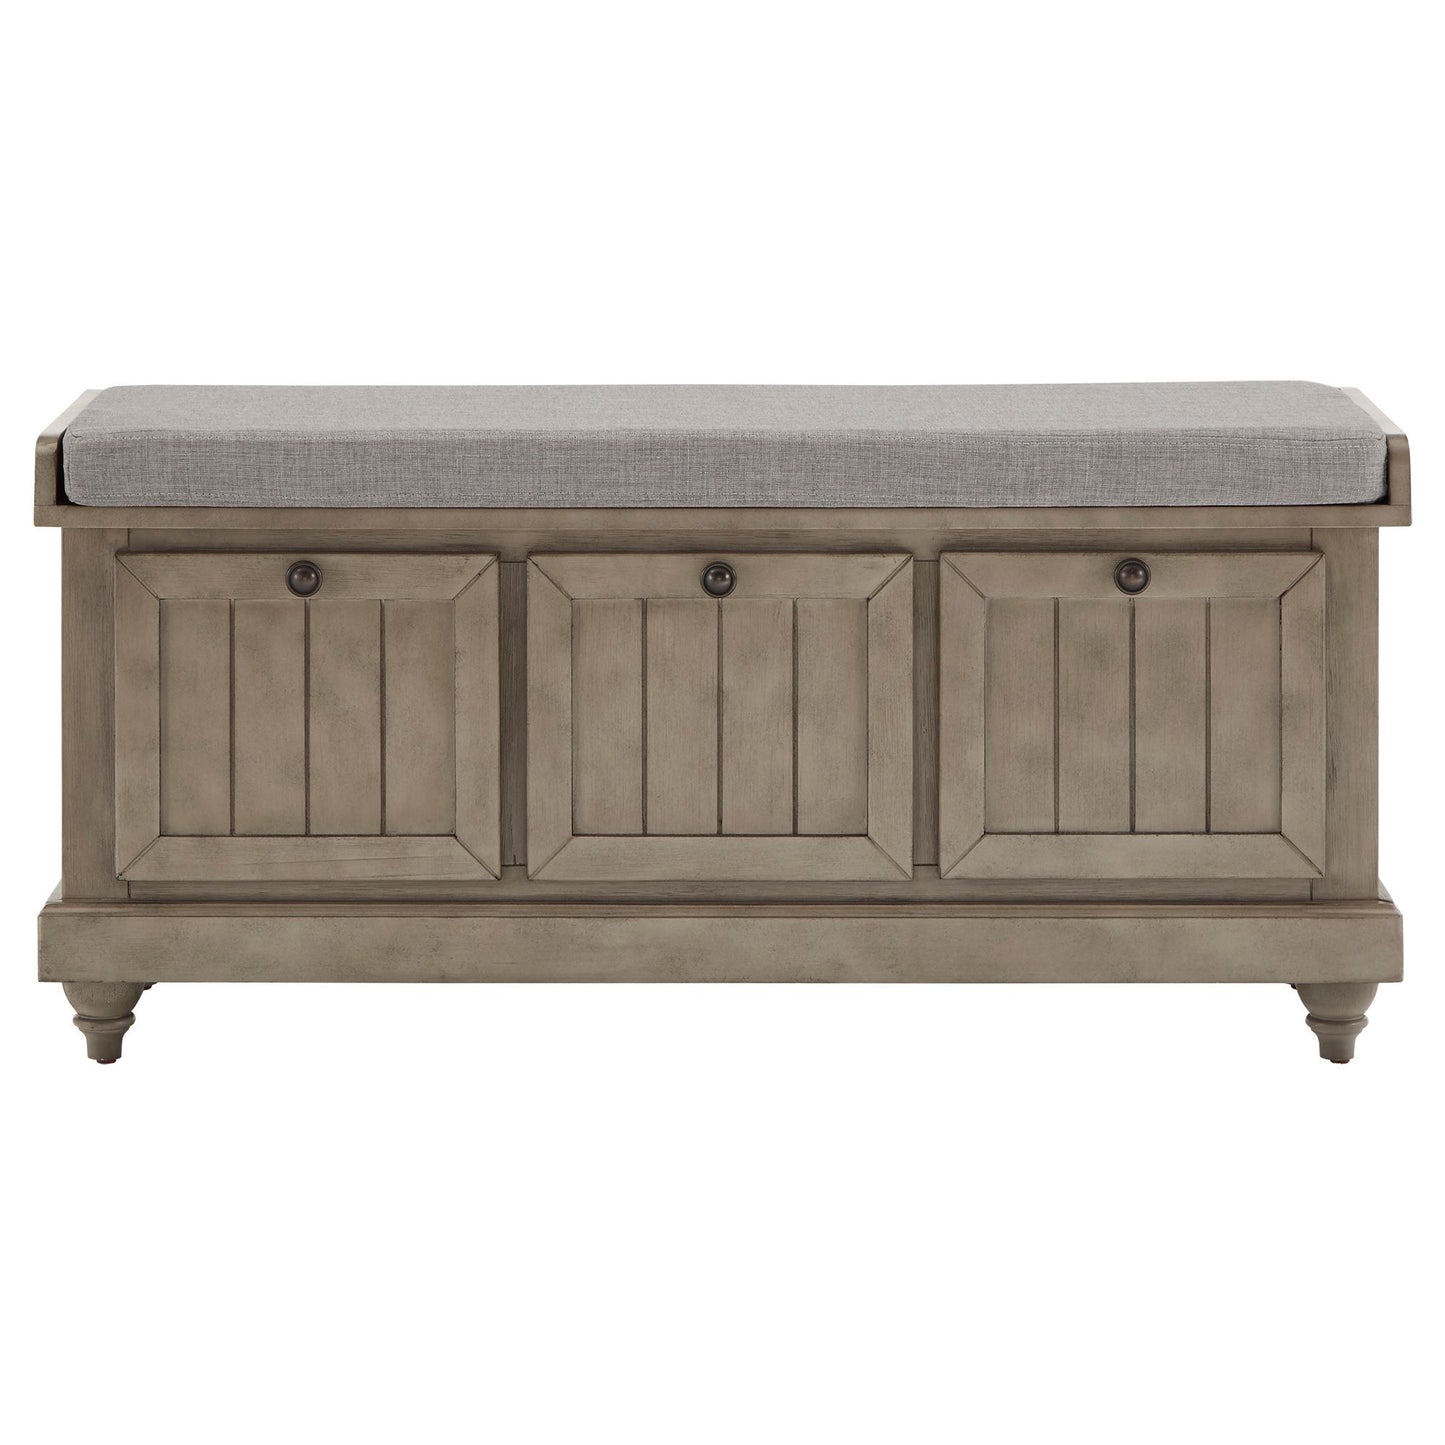 Storage Bench with Linen Seat Cushion - Antique Grey Finish